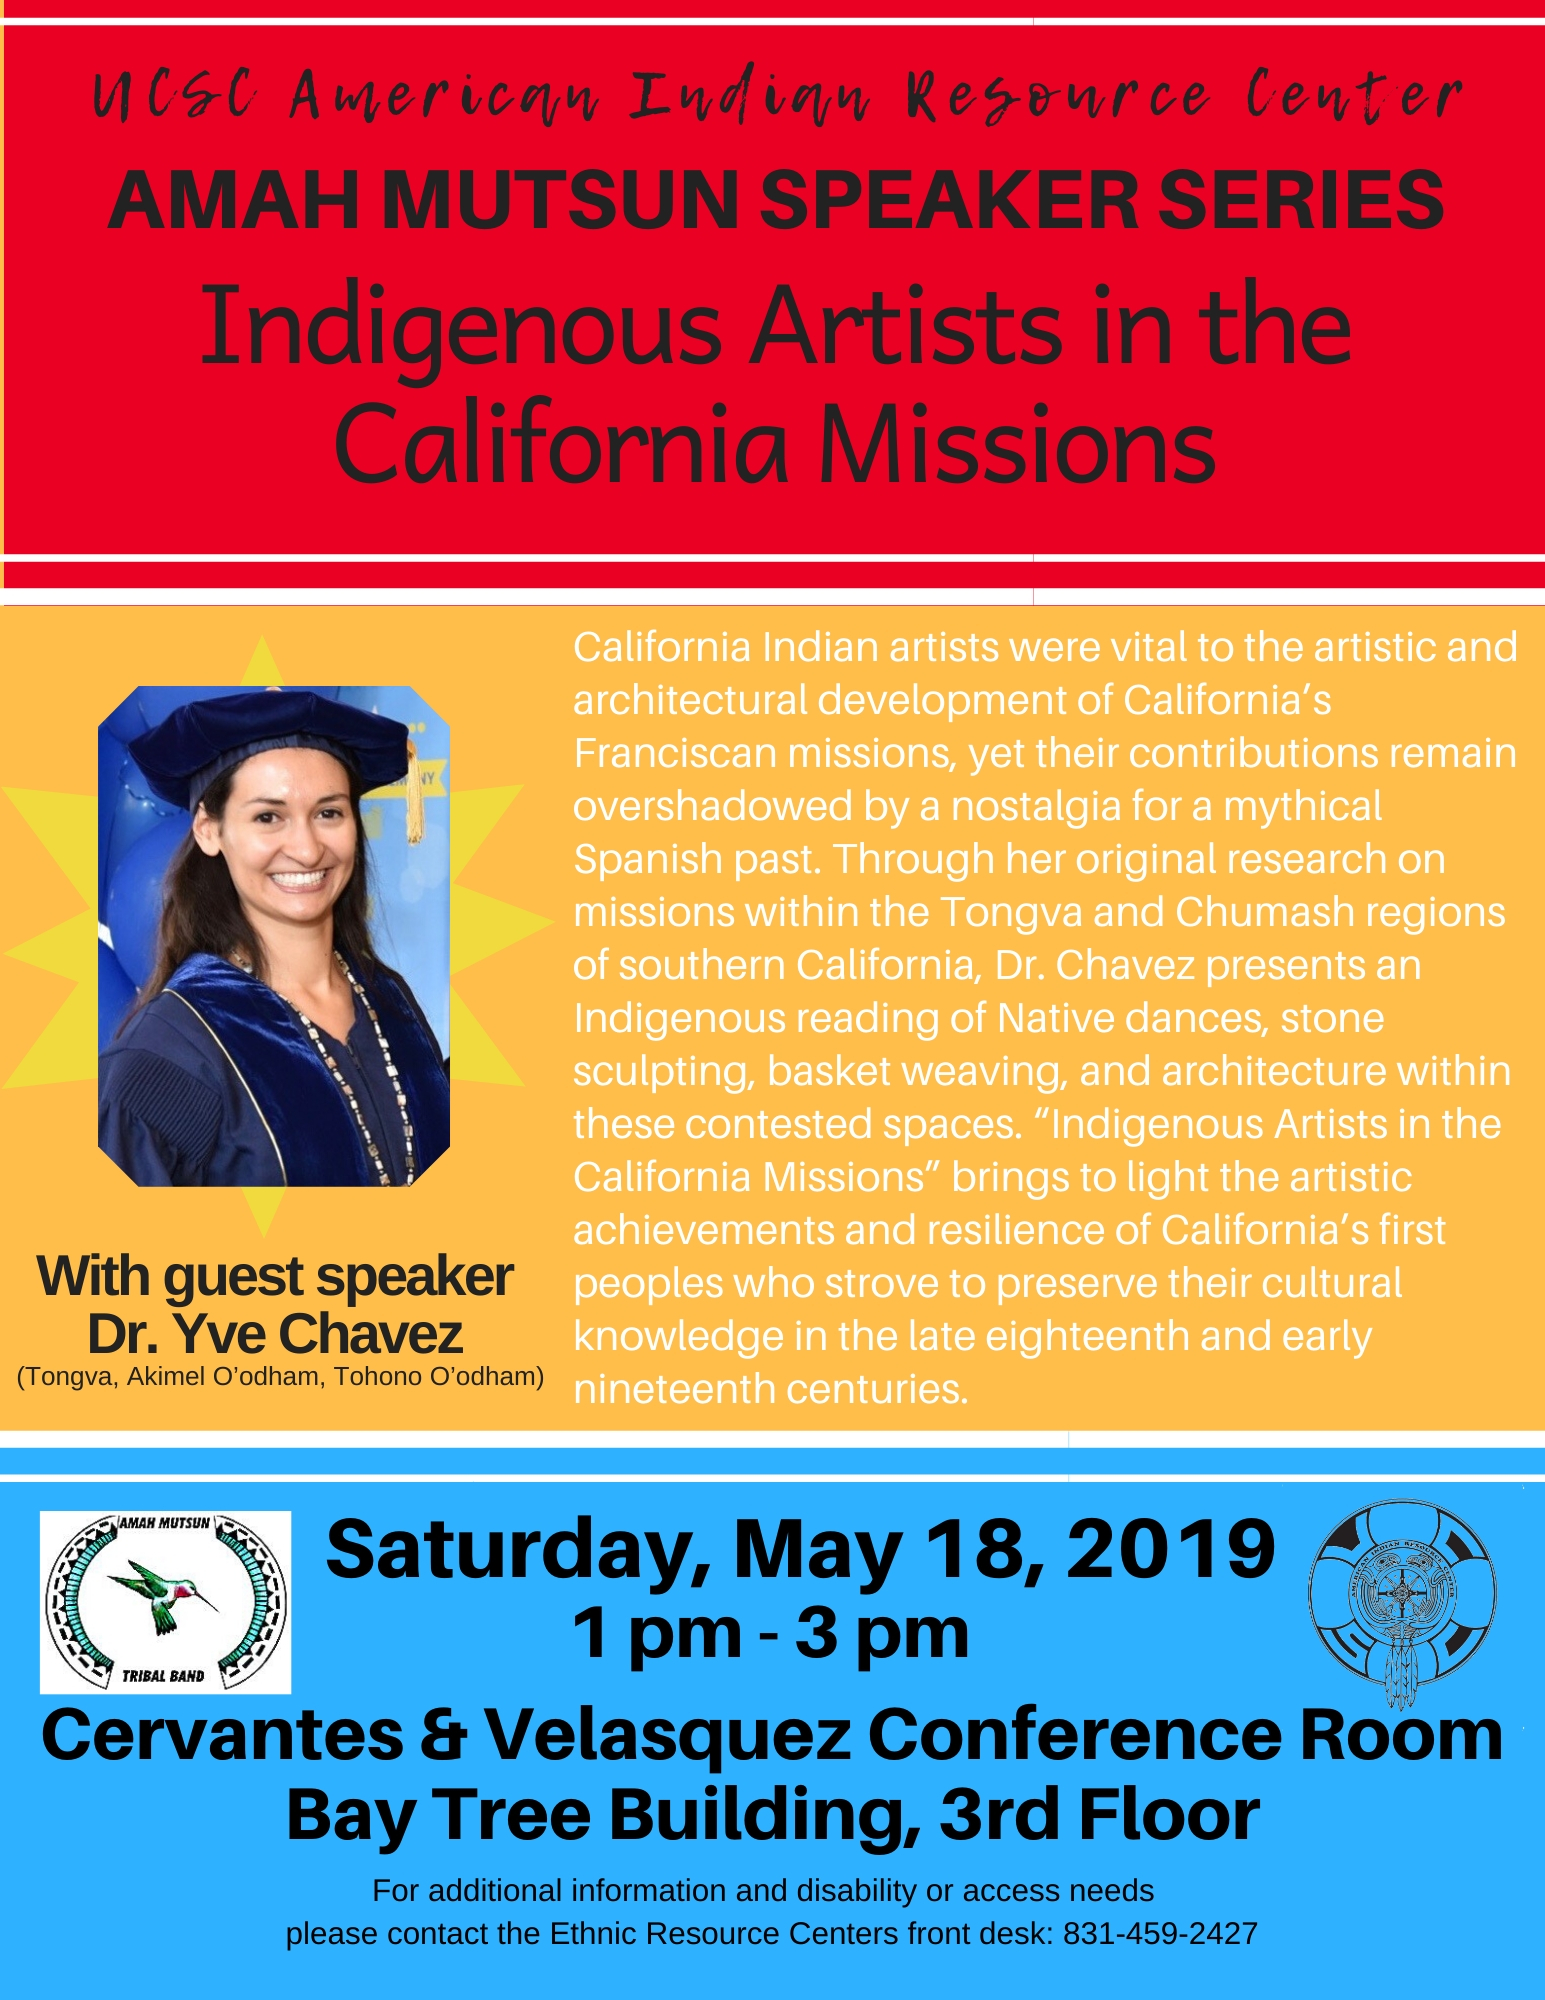 Amah Mutsun Speaker Series: Indigenous Artists in the California Missions with Dr. Yve Chavez